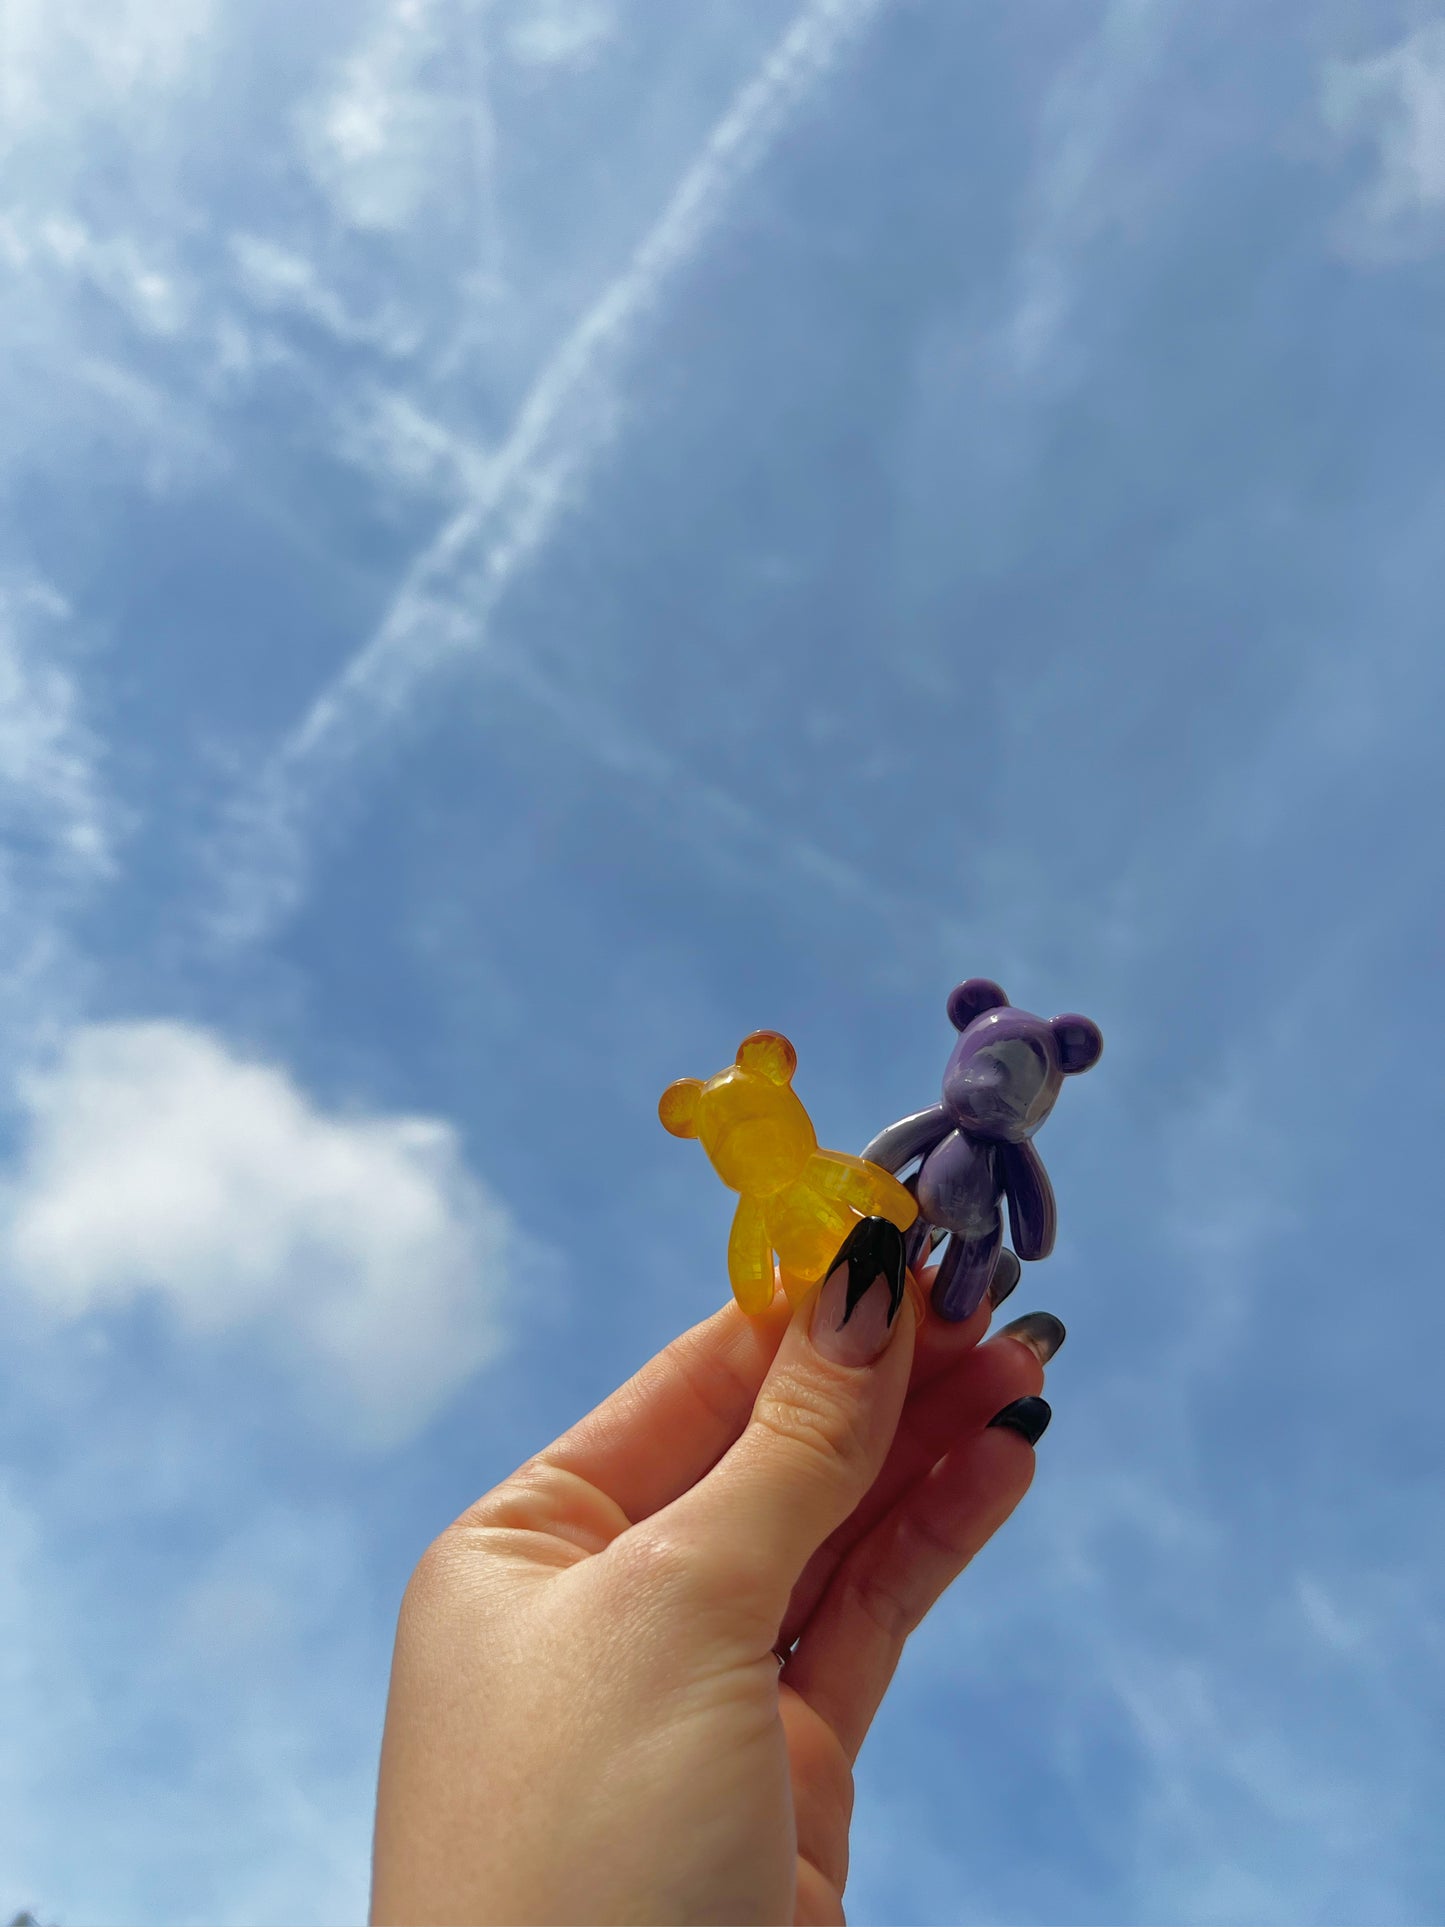 Yellow see through bear and purple marble bear against a bright blue sky in an adult hand with black painted nails.